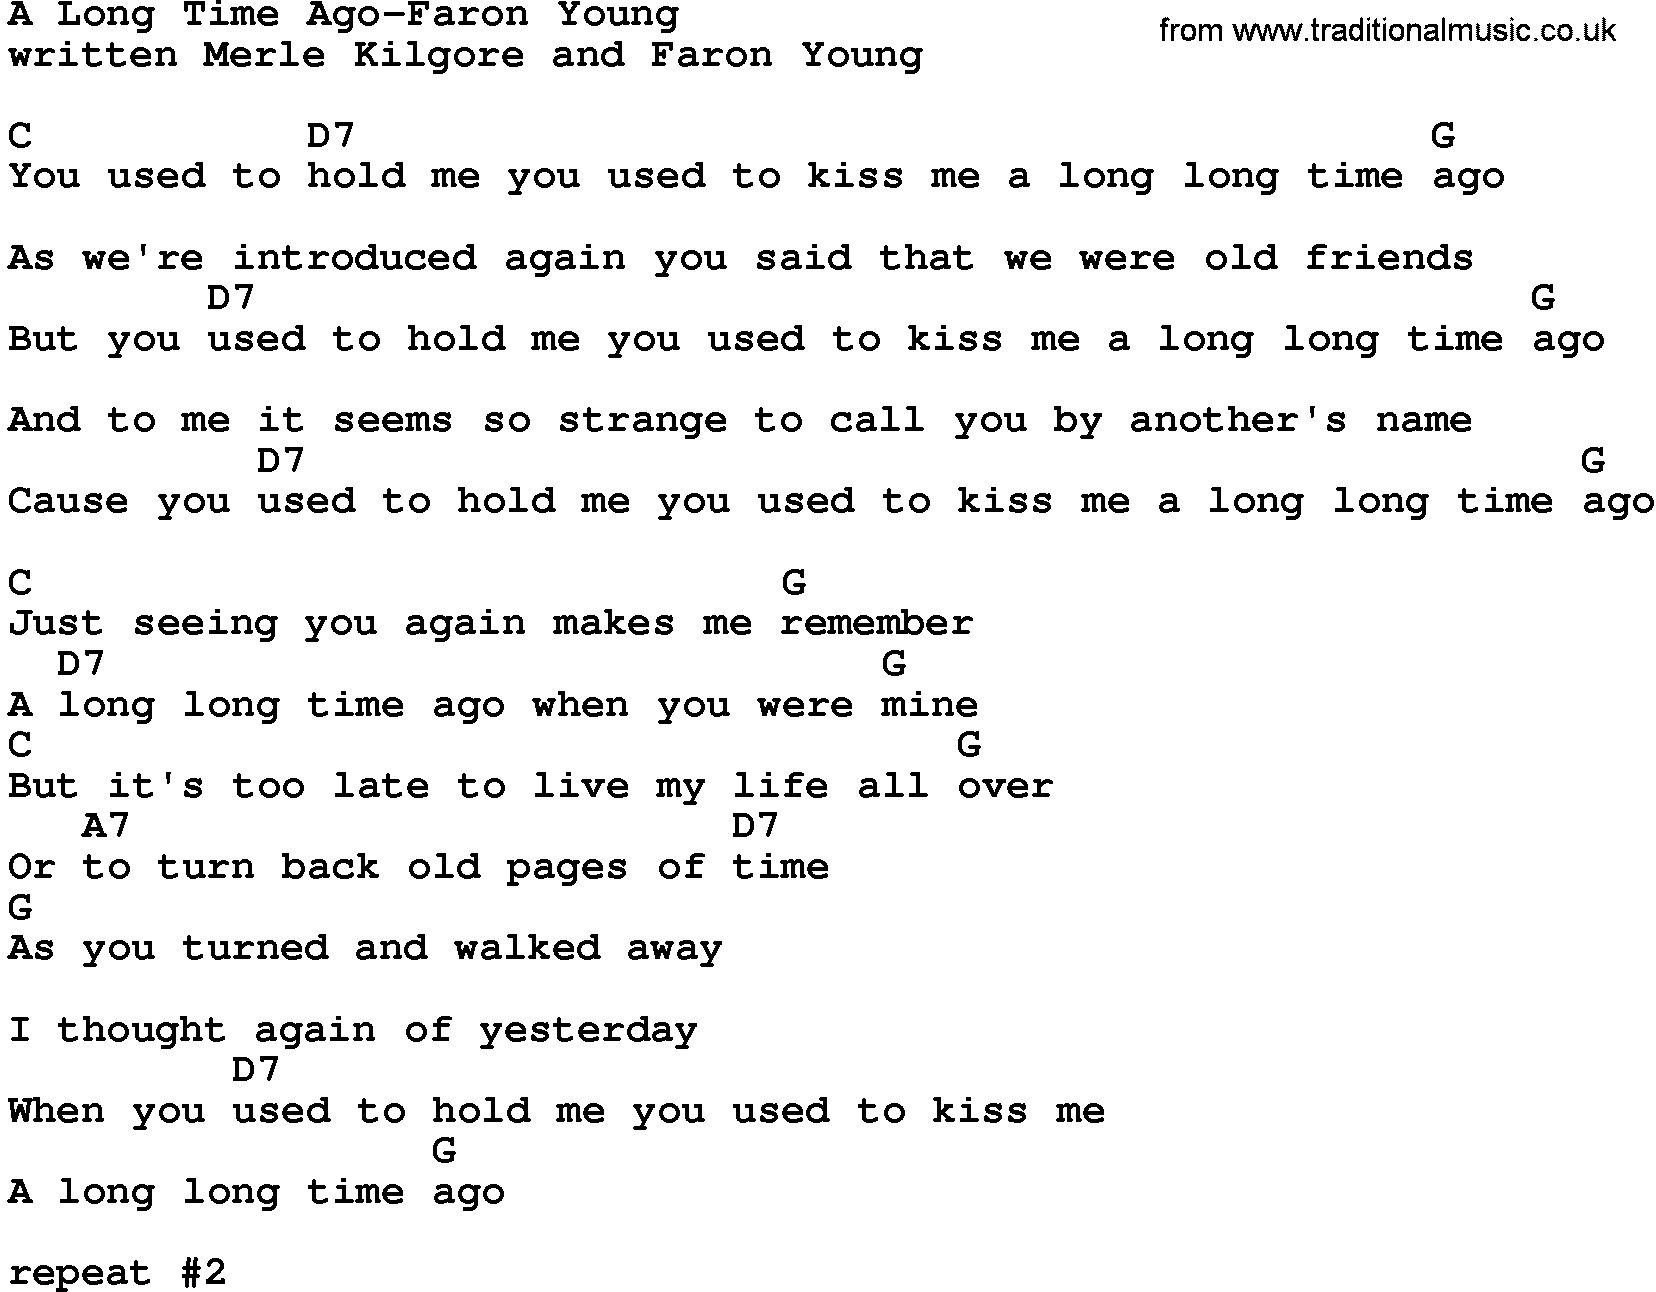 Country music song: A Long Time Ago-Faron Young lyrics and chords